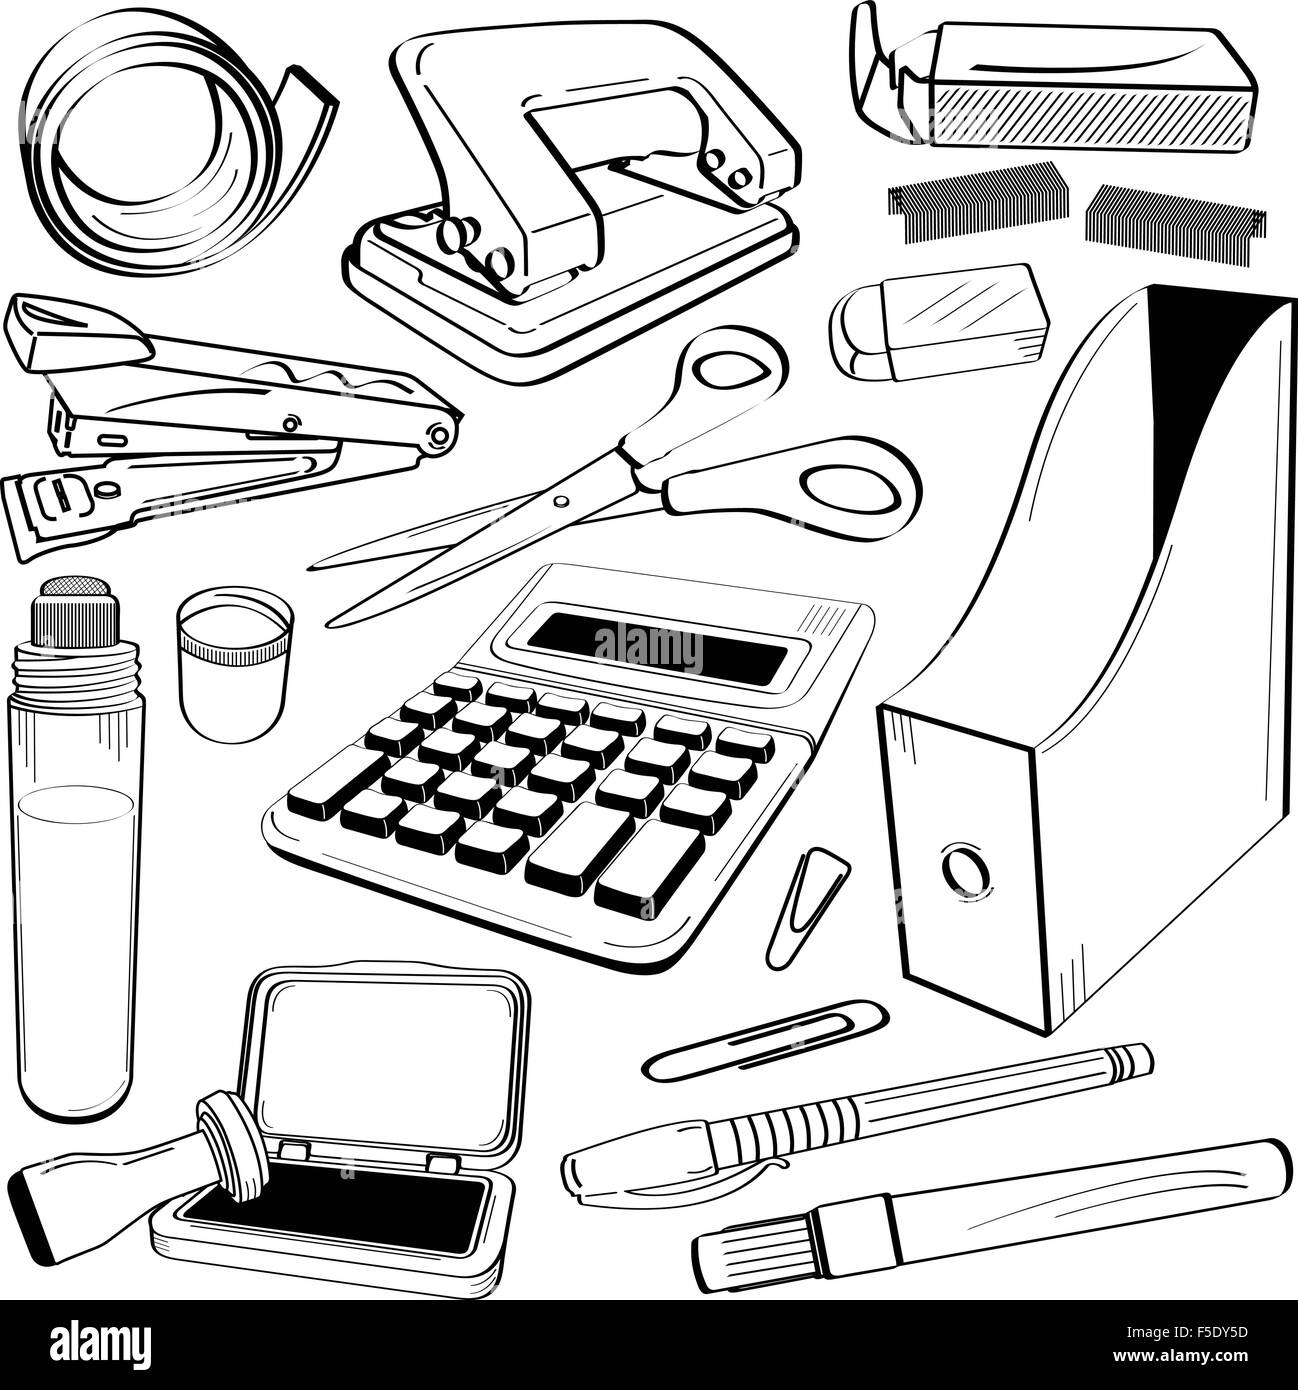 Office stationery Black and White Stock Photos & Images - Alamy